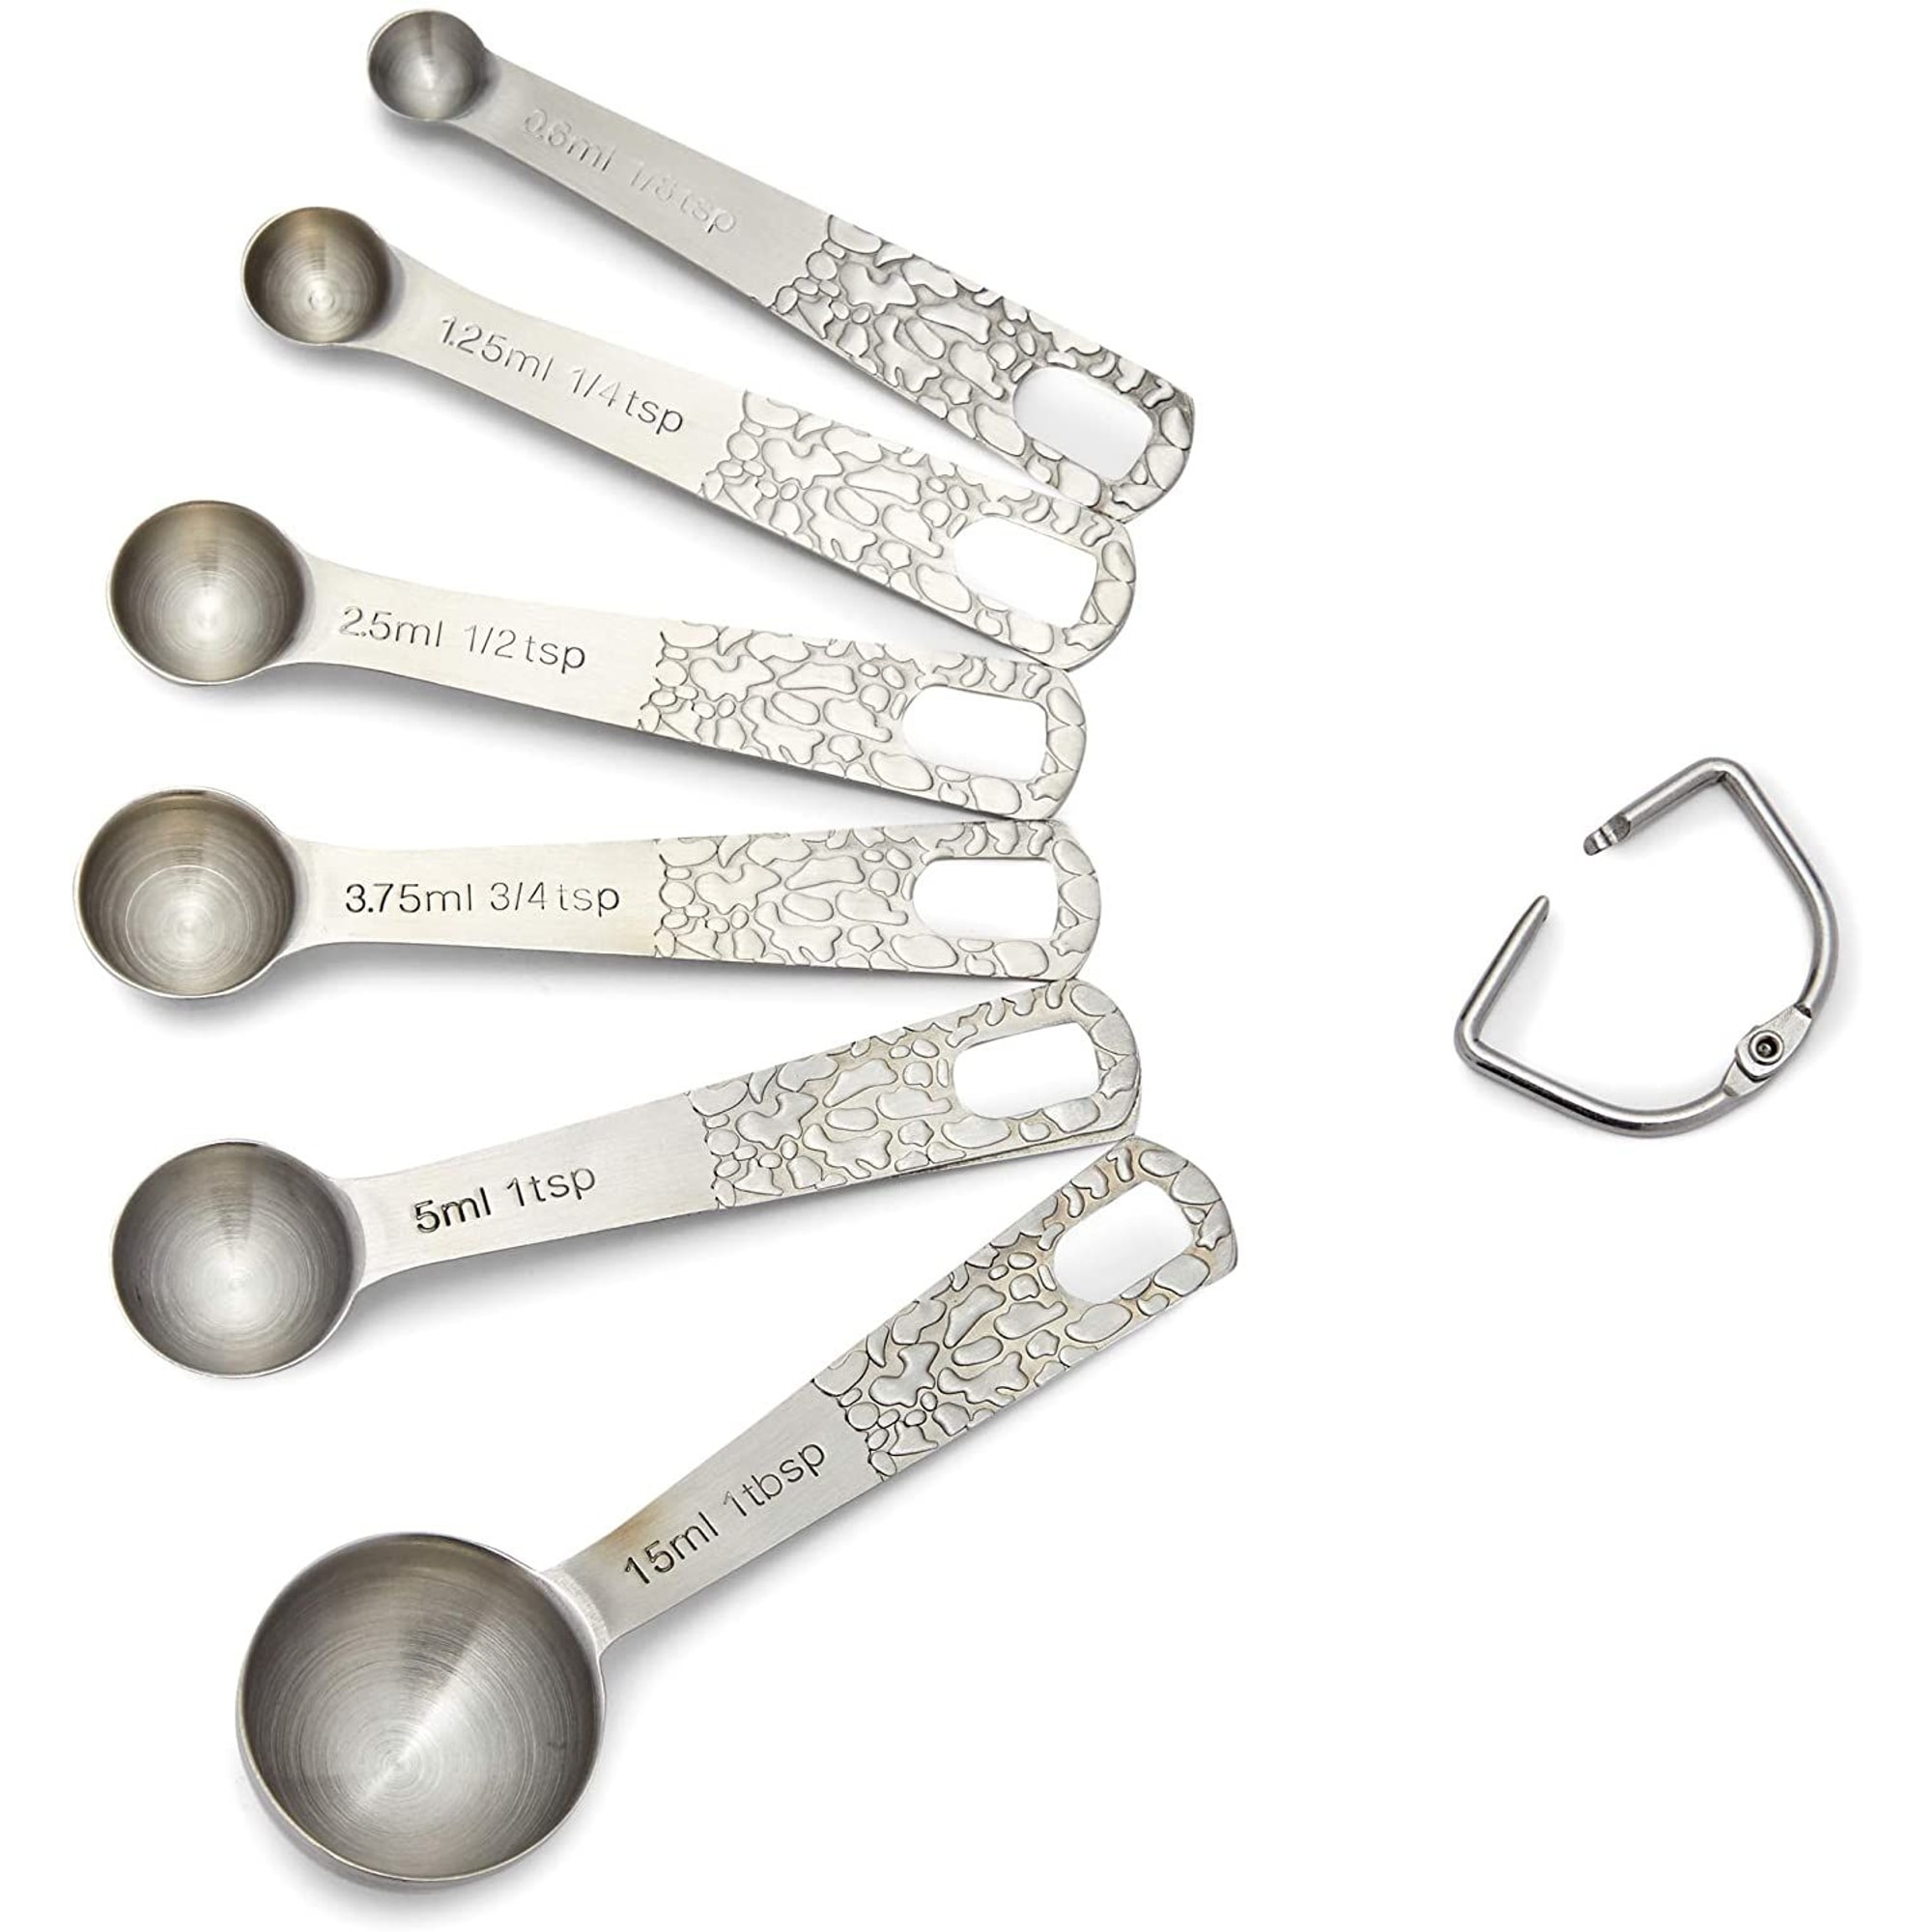 https://ak1.ostkcdn.com/images/products/is/images/direct/0df2eee4fa91b5f9e3063cb6d3abca84030d4981/Stainless-Steel-Measuring-Cup-and-Spoon-Set%2C-US-and-Metric-Measurements-%2811-Sizes%29.jpg